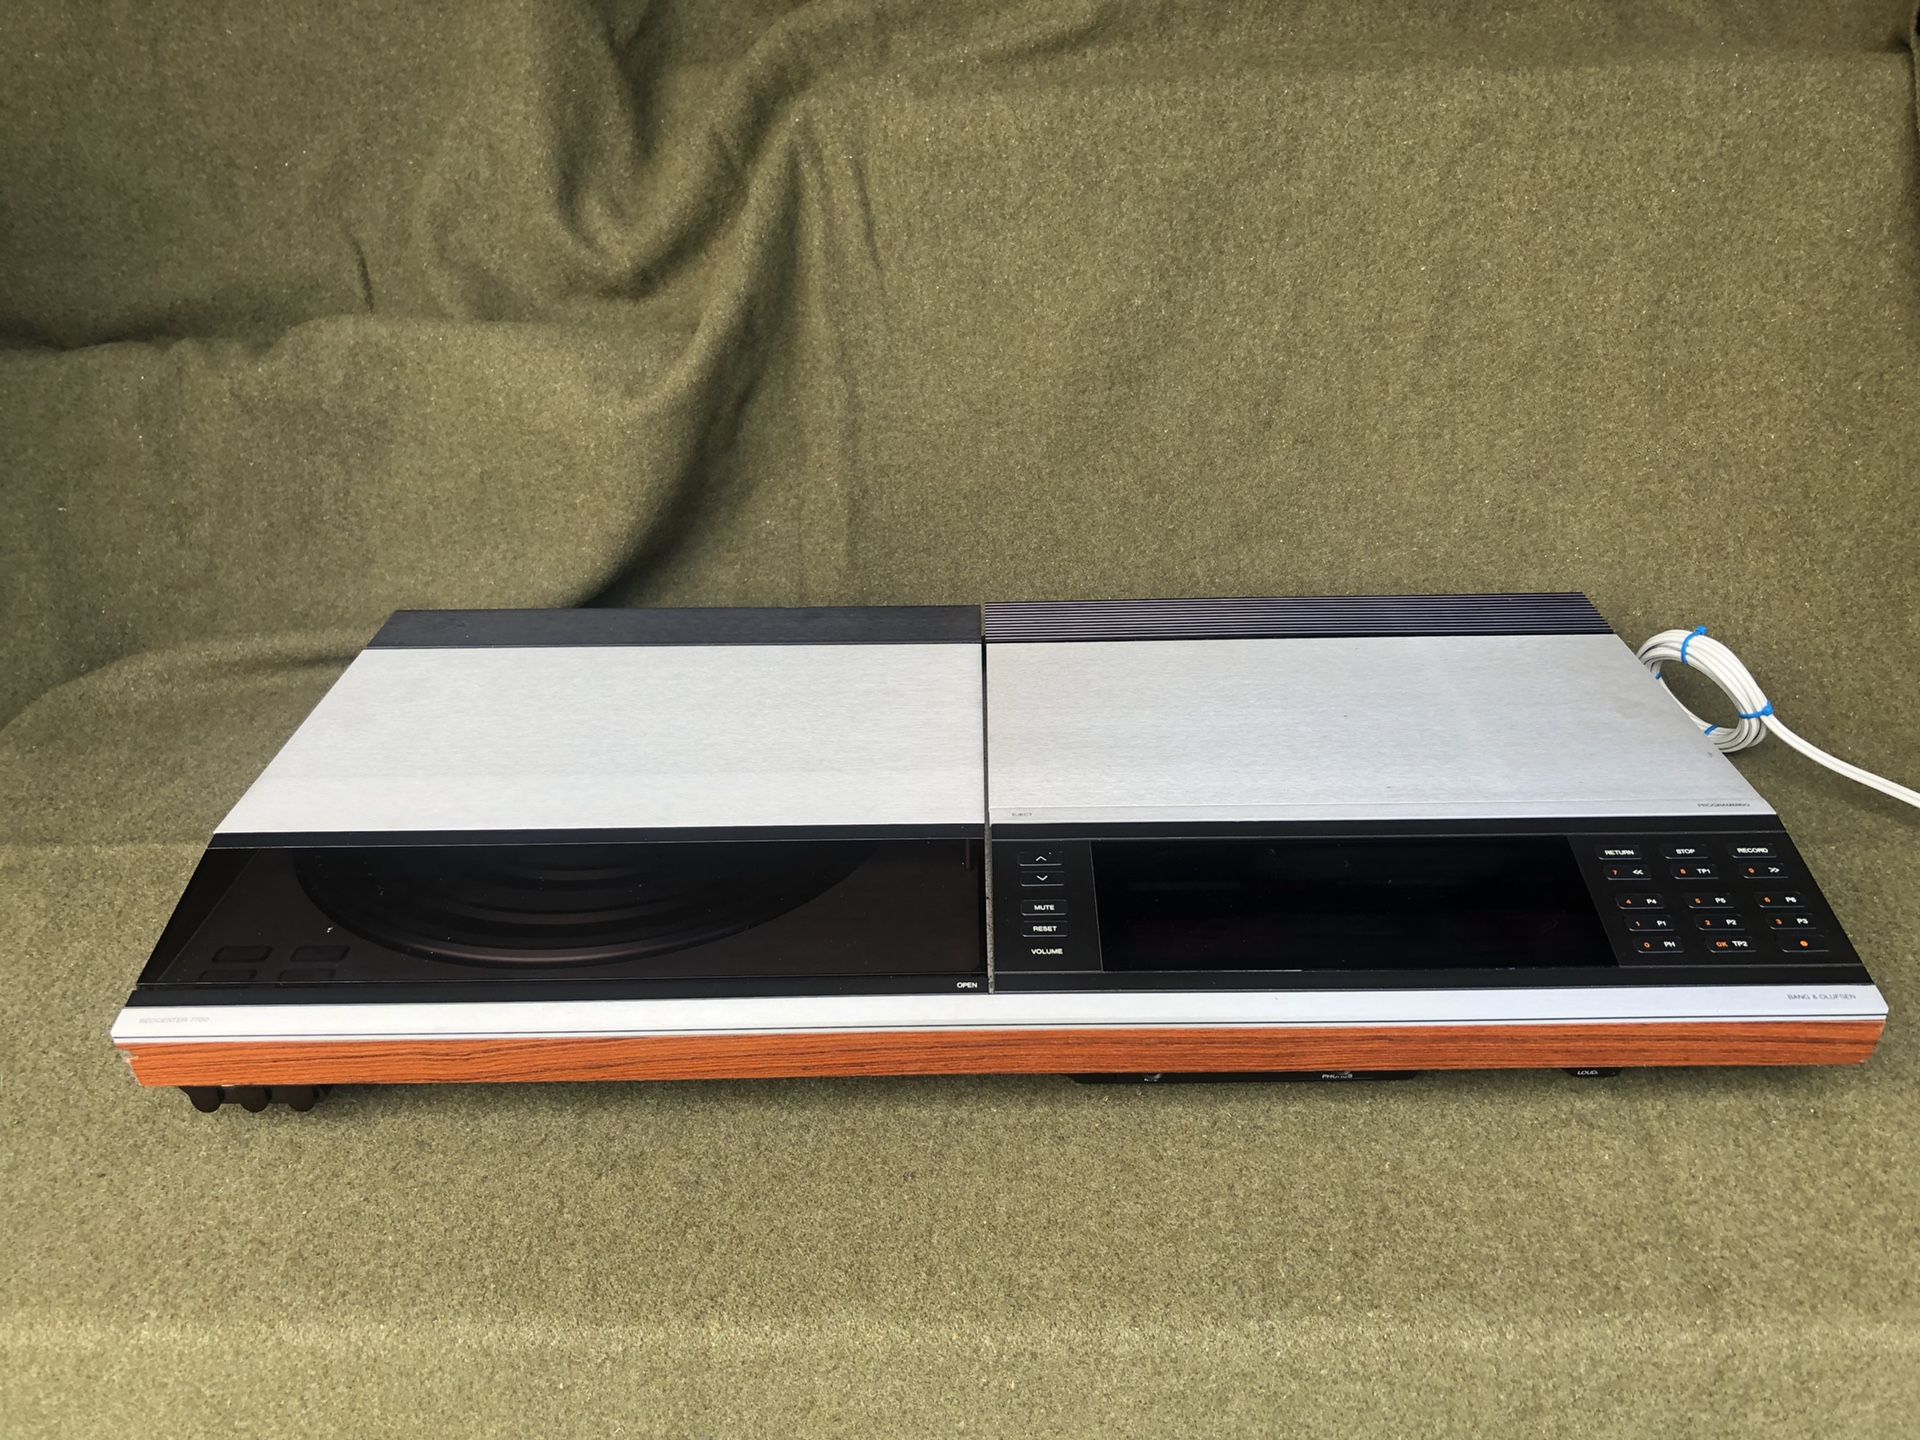 Bang& Olufsen Beocenter 7700 (Denmark) stereo reciever unit..am-fm, cassette deck, turn table (no needle)(working/clean)